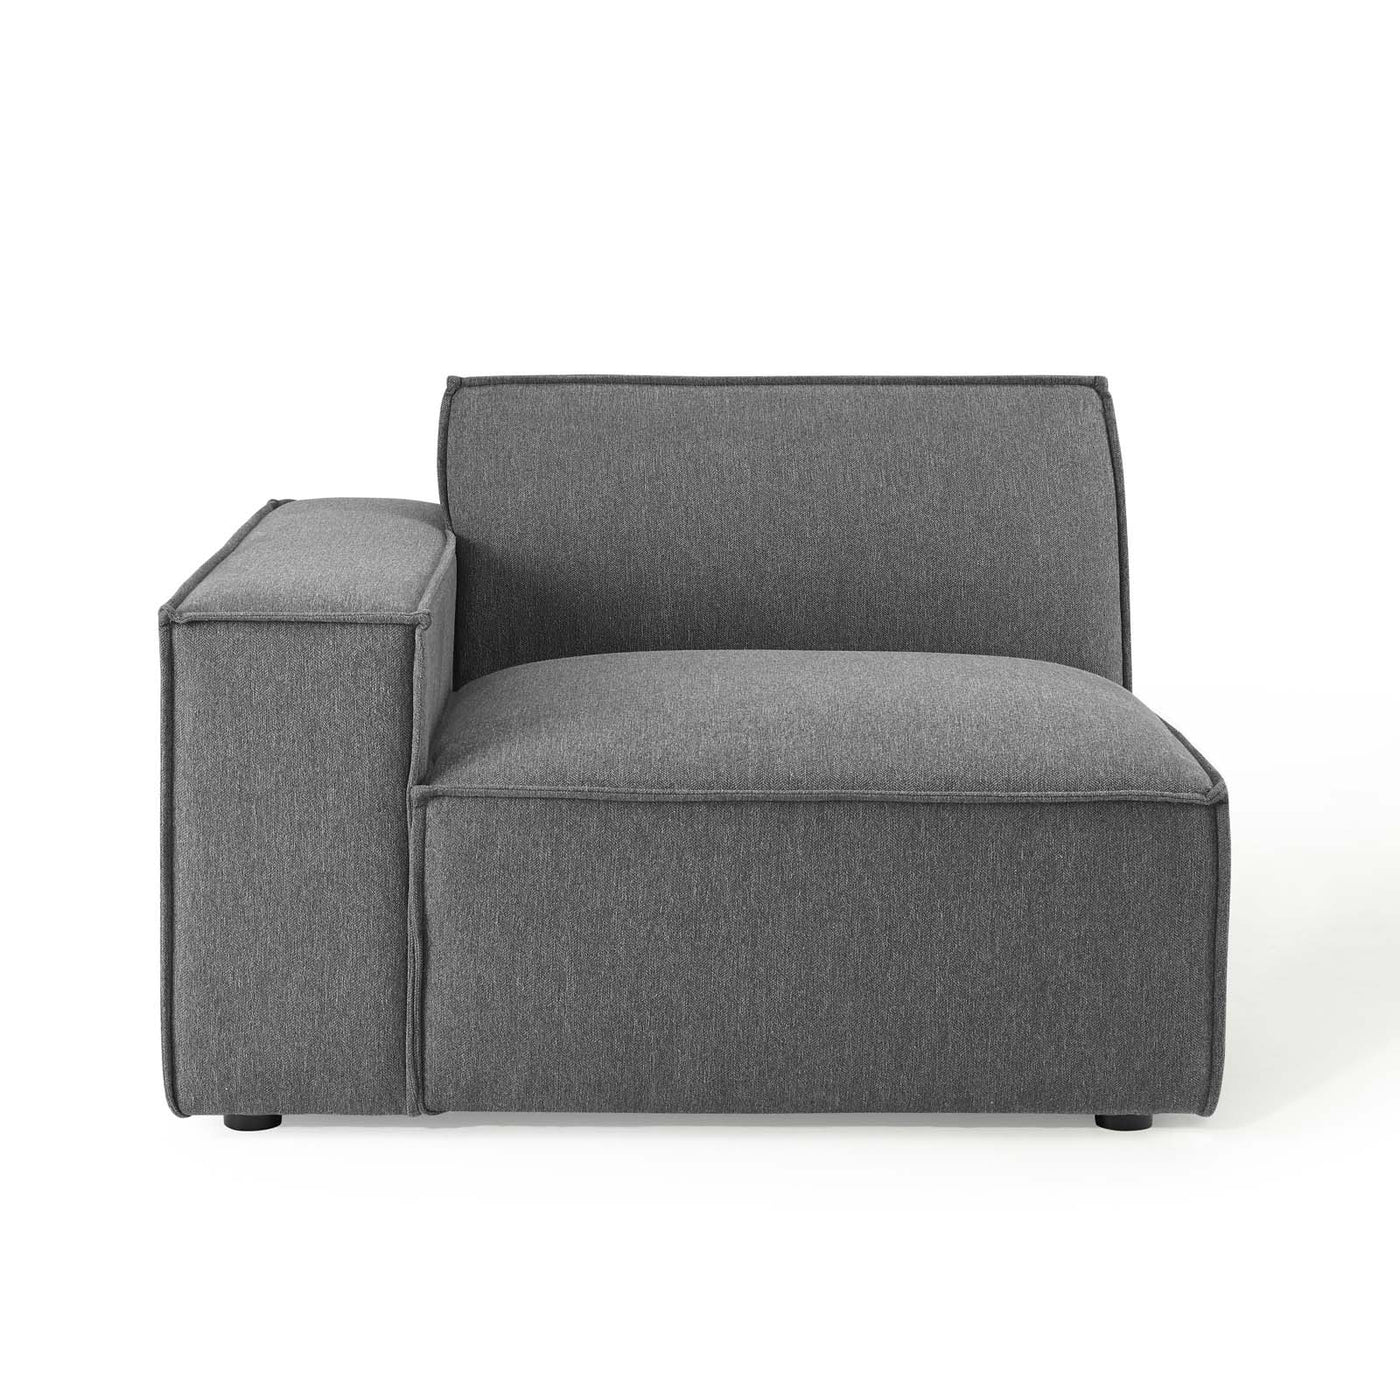 Restore Left-Arm Sectional Sofa Chair